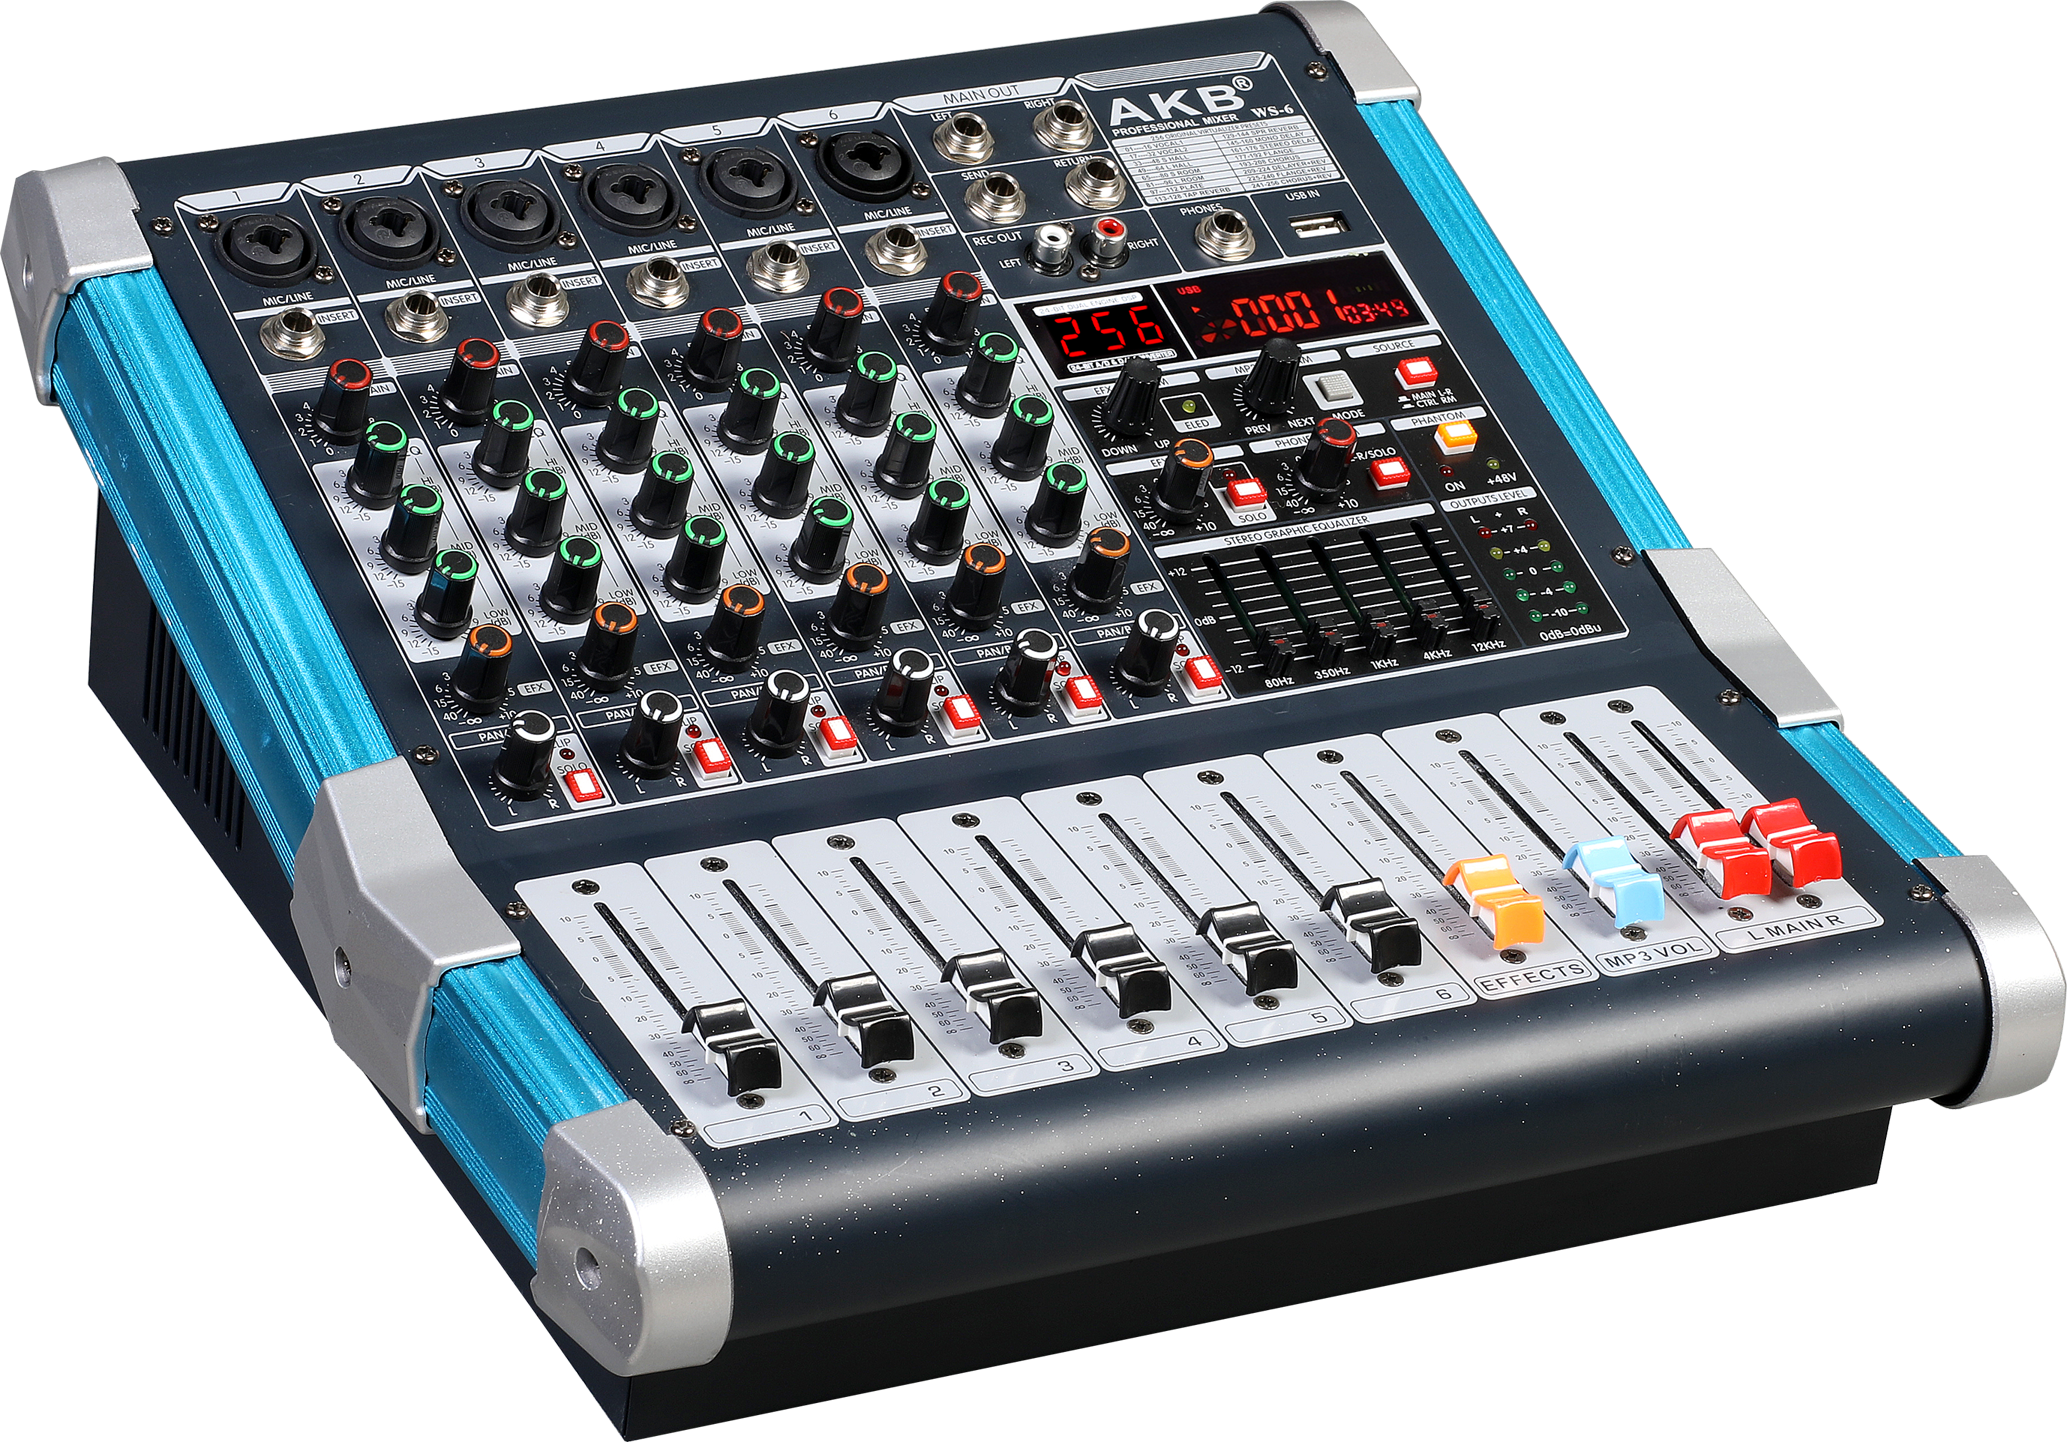 The Evolution of Audio Mixing: Exploring Sound Mixers, Power Mixers, and USB Mixers